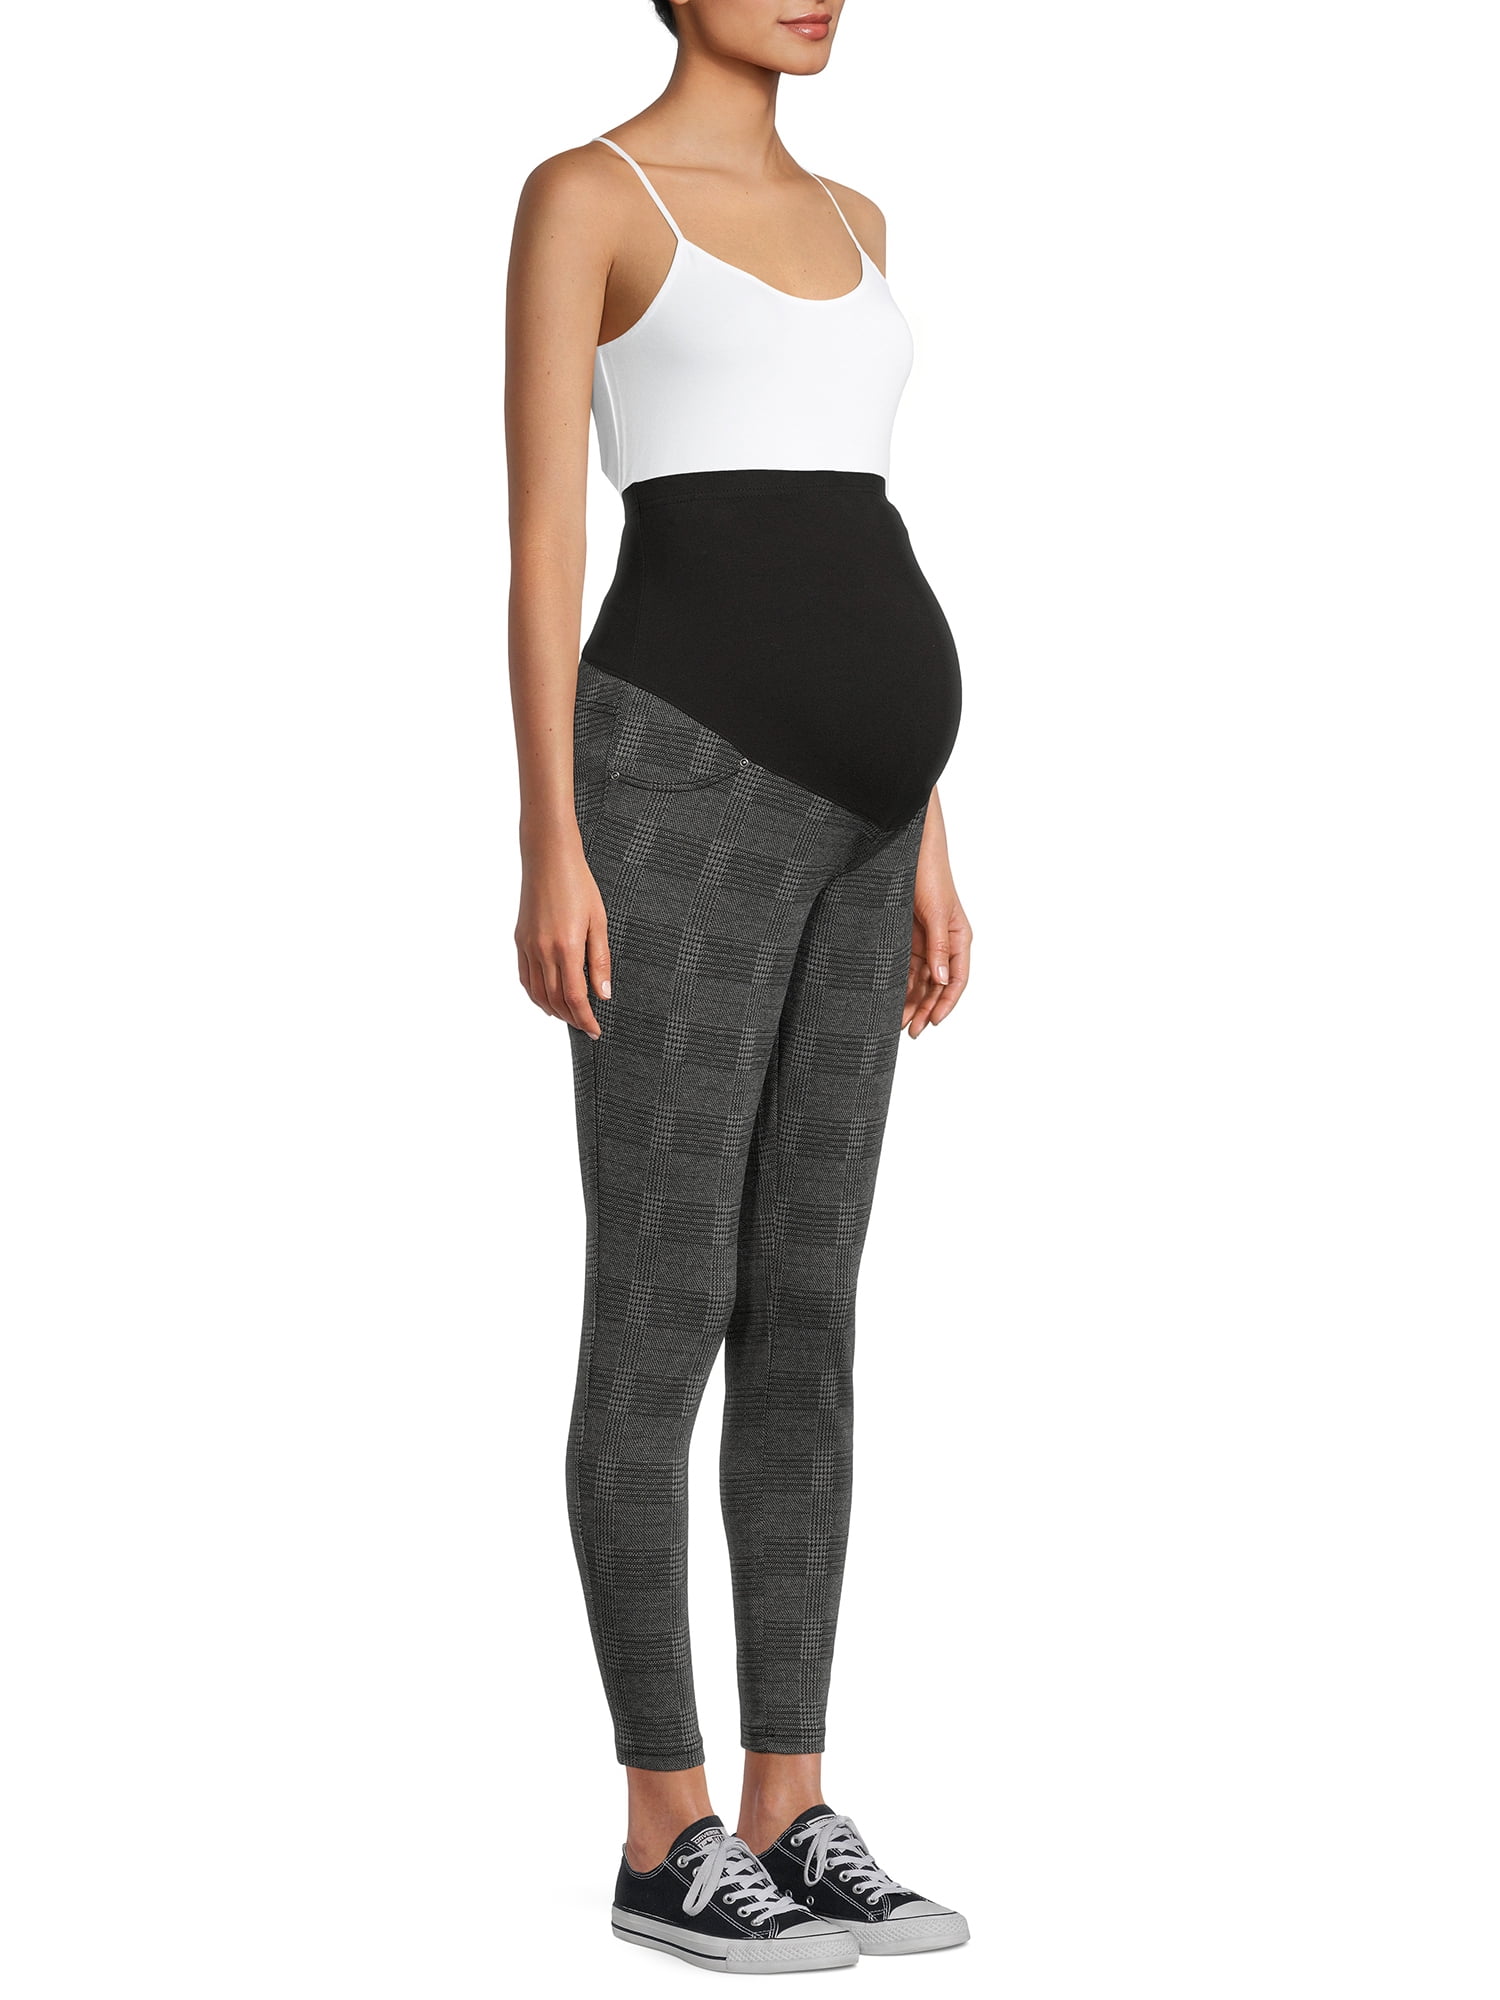 Time and Tru Maternity Ponte Knit Leggings With Full Panel. Size Medium